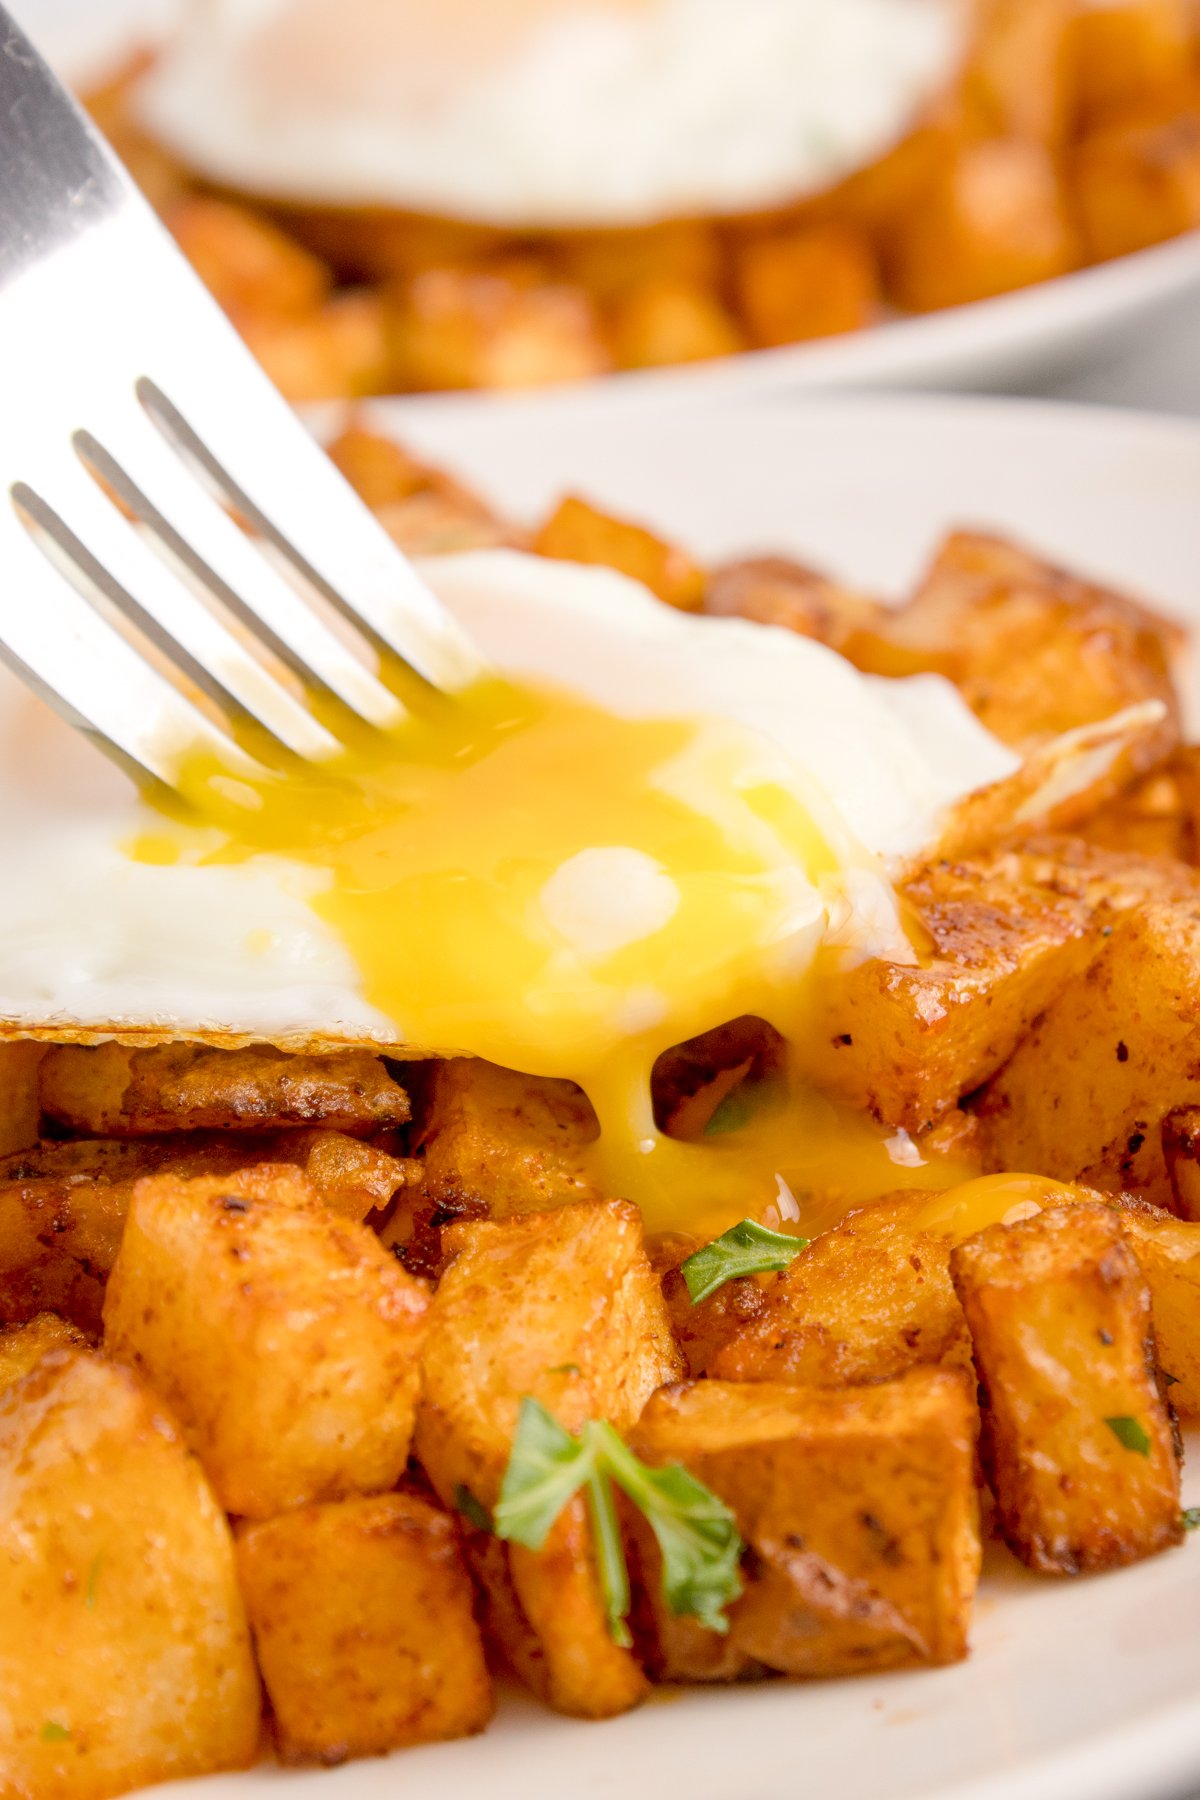 Diced air fried breakfast potatoes topped with a sunny-side up egg that's yolk is oozing out.